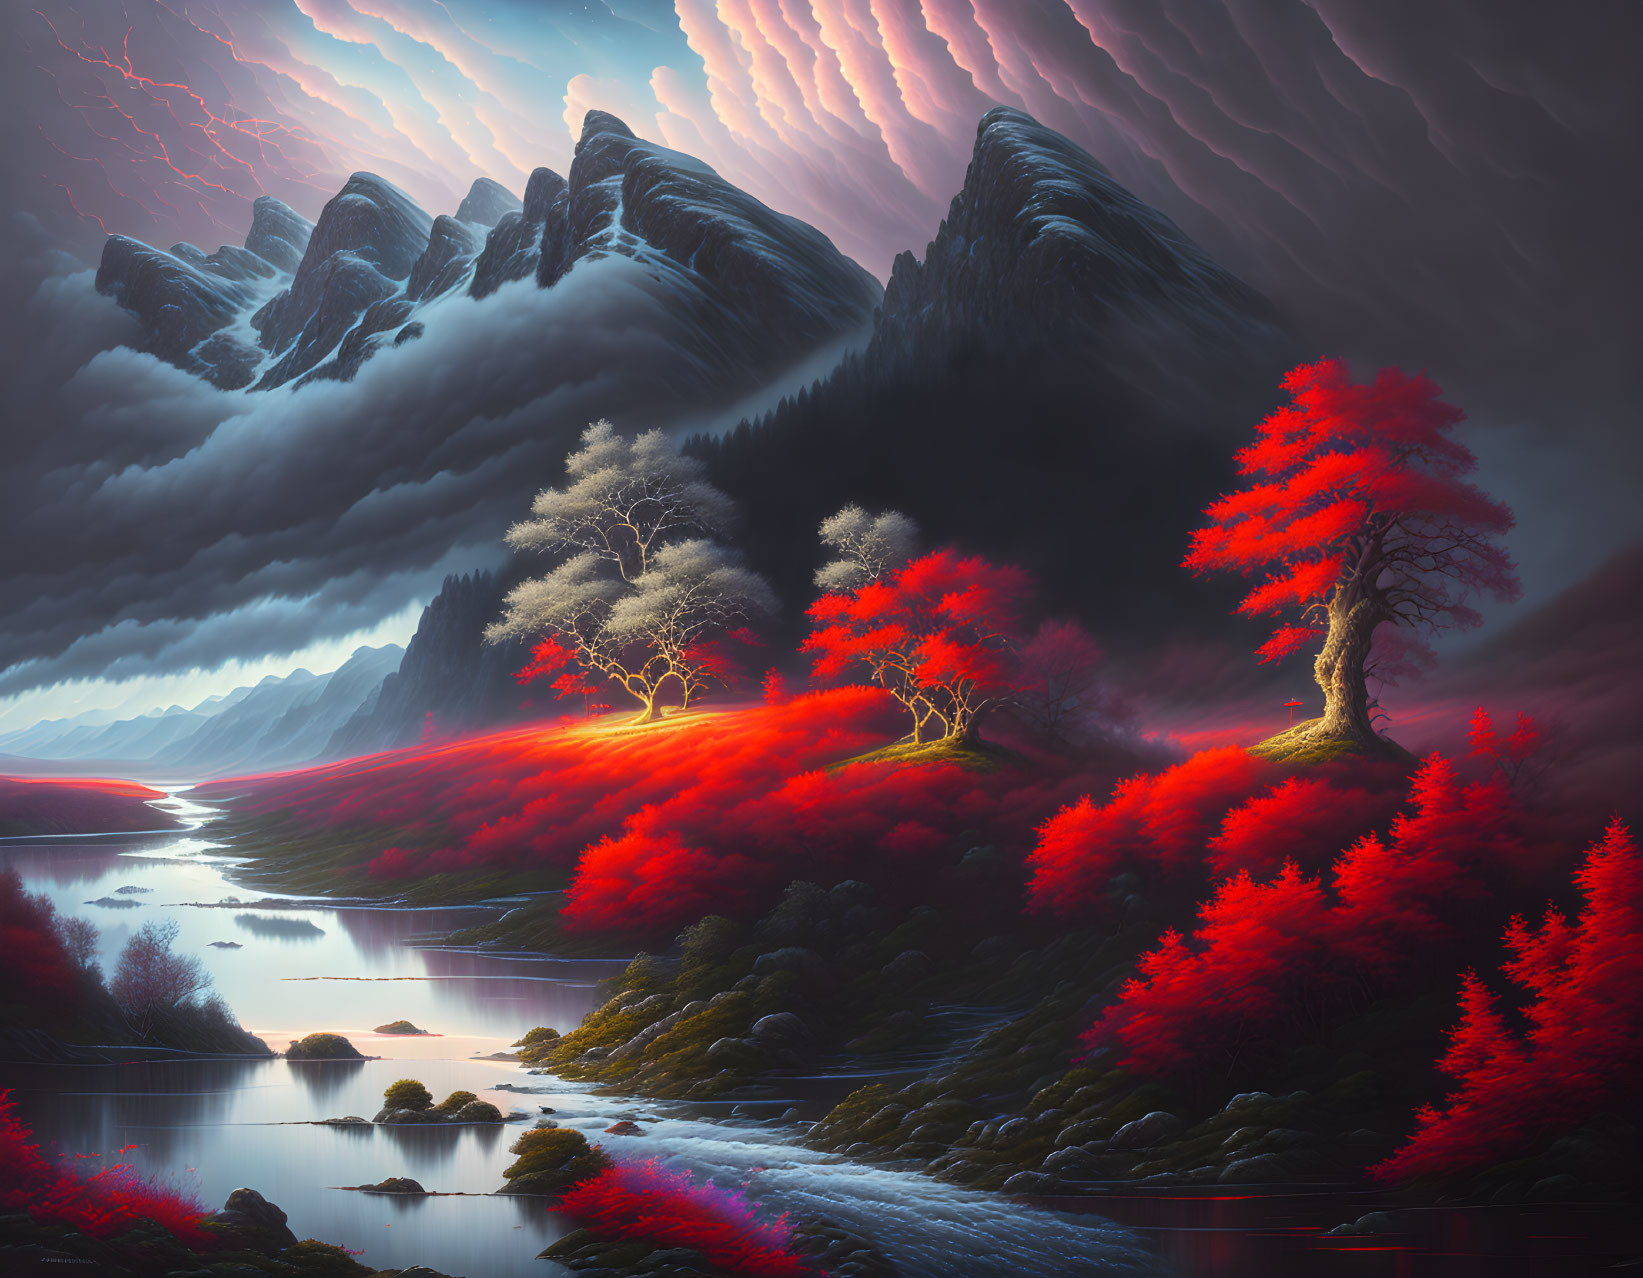 Vivid landscape with crimson trees, tranquil river, mountains, and lightning-lit clouds